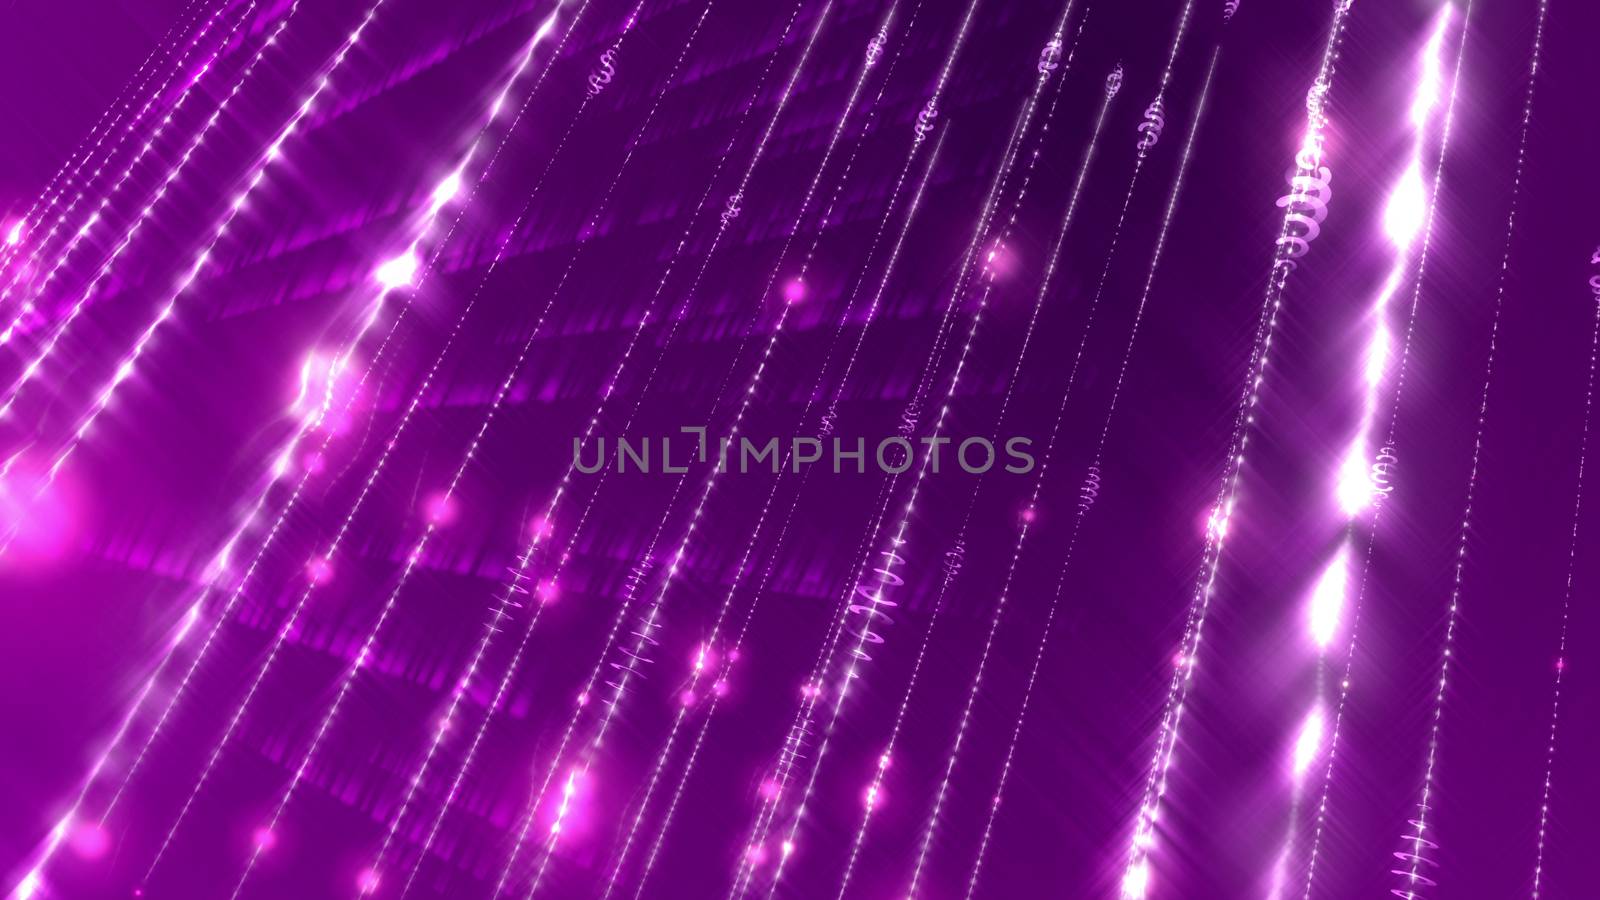 Multilayered 3d rendering of a sci-fi cyberspace  with lines and dots connected in a number of shining networks shot askew  in the dark violet cyberspace background